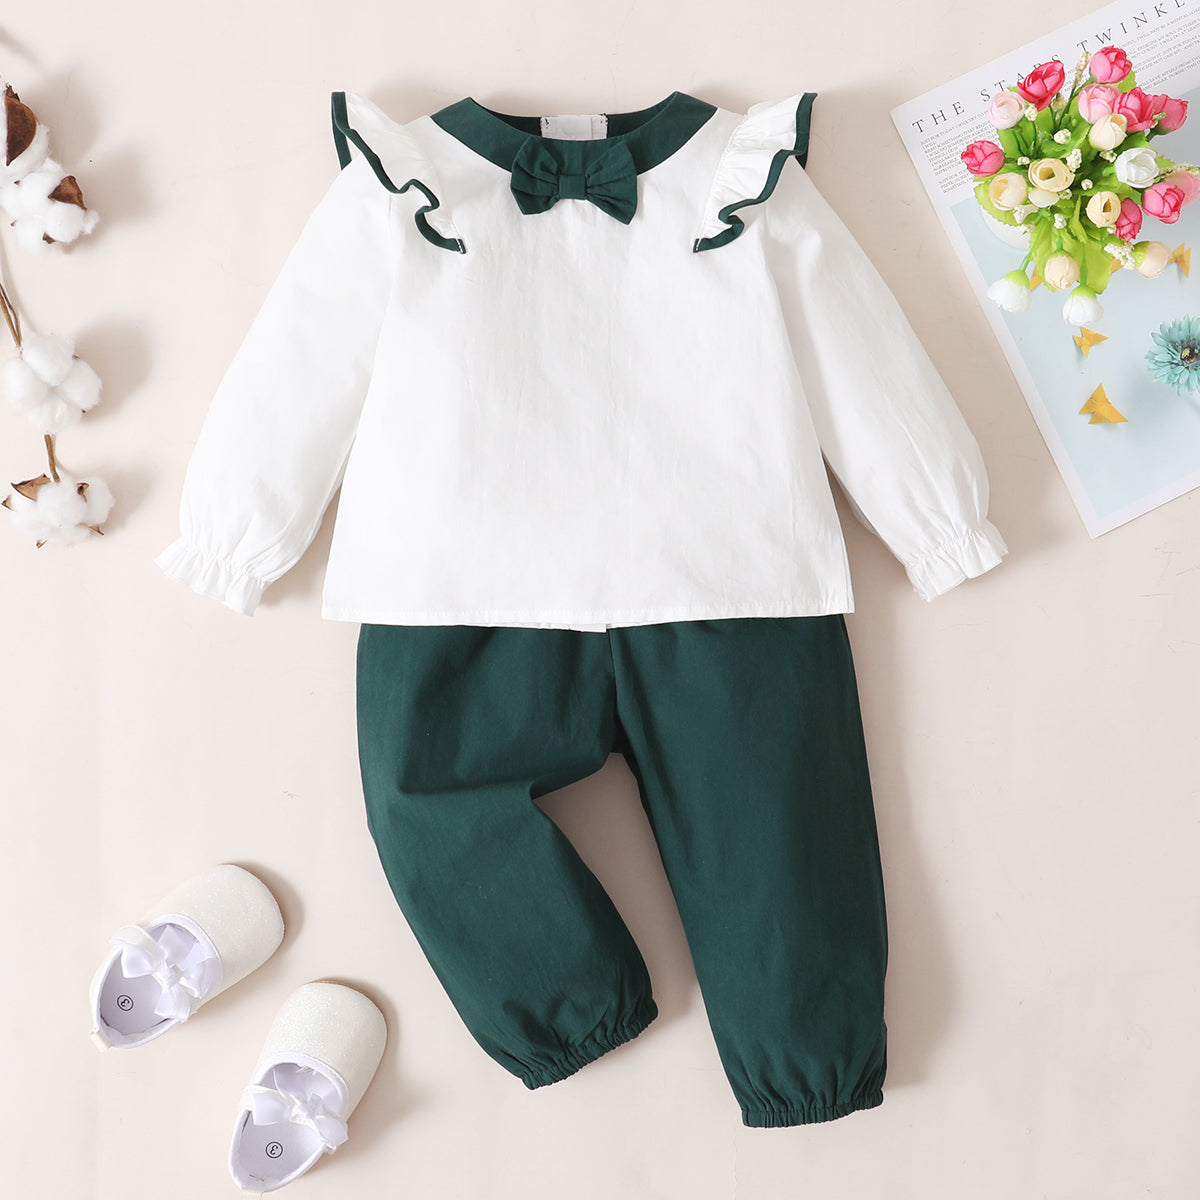 Bow Detail Top and Pants Set